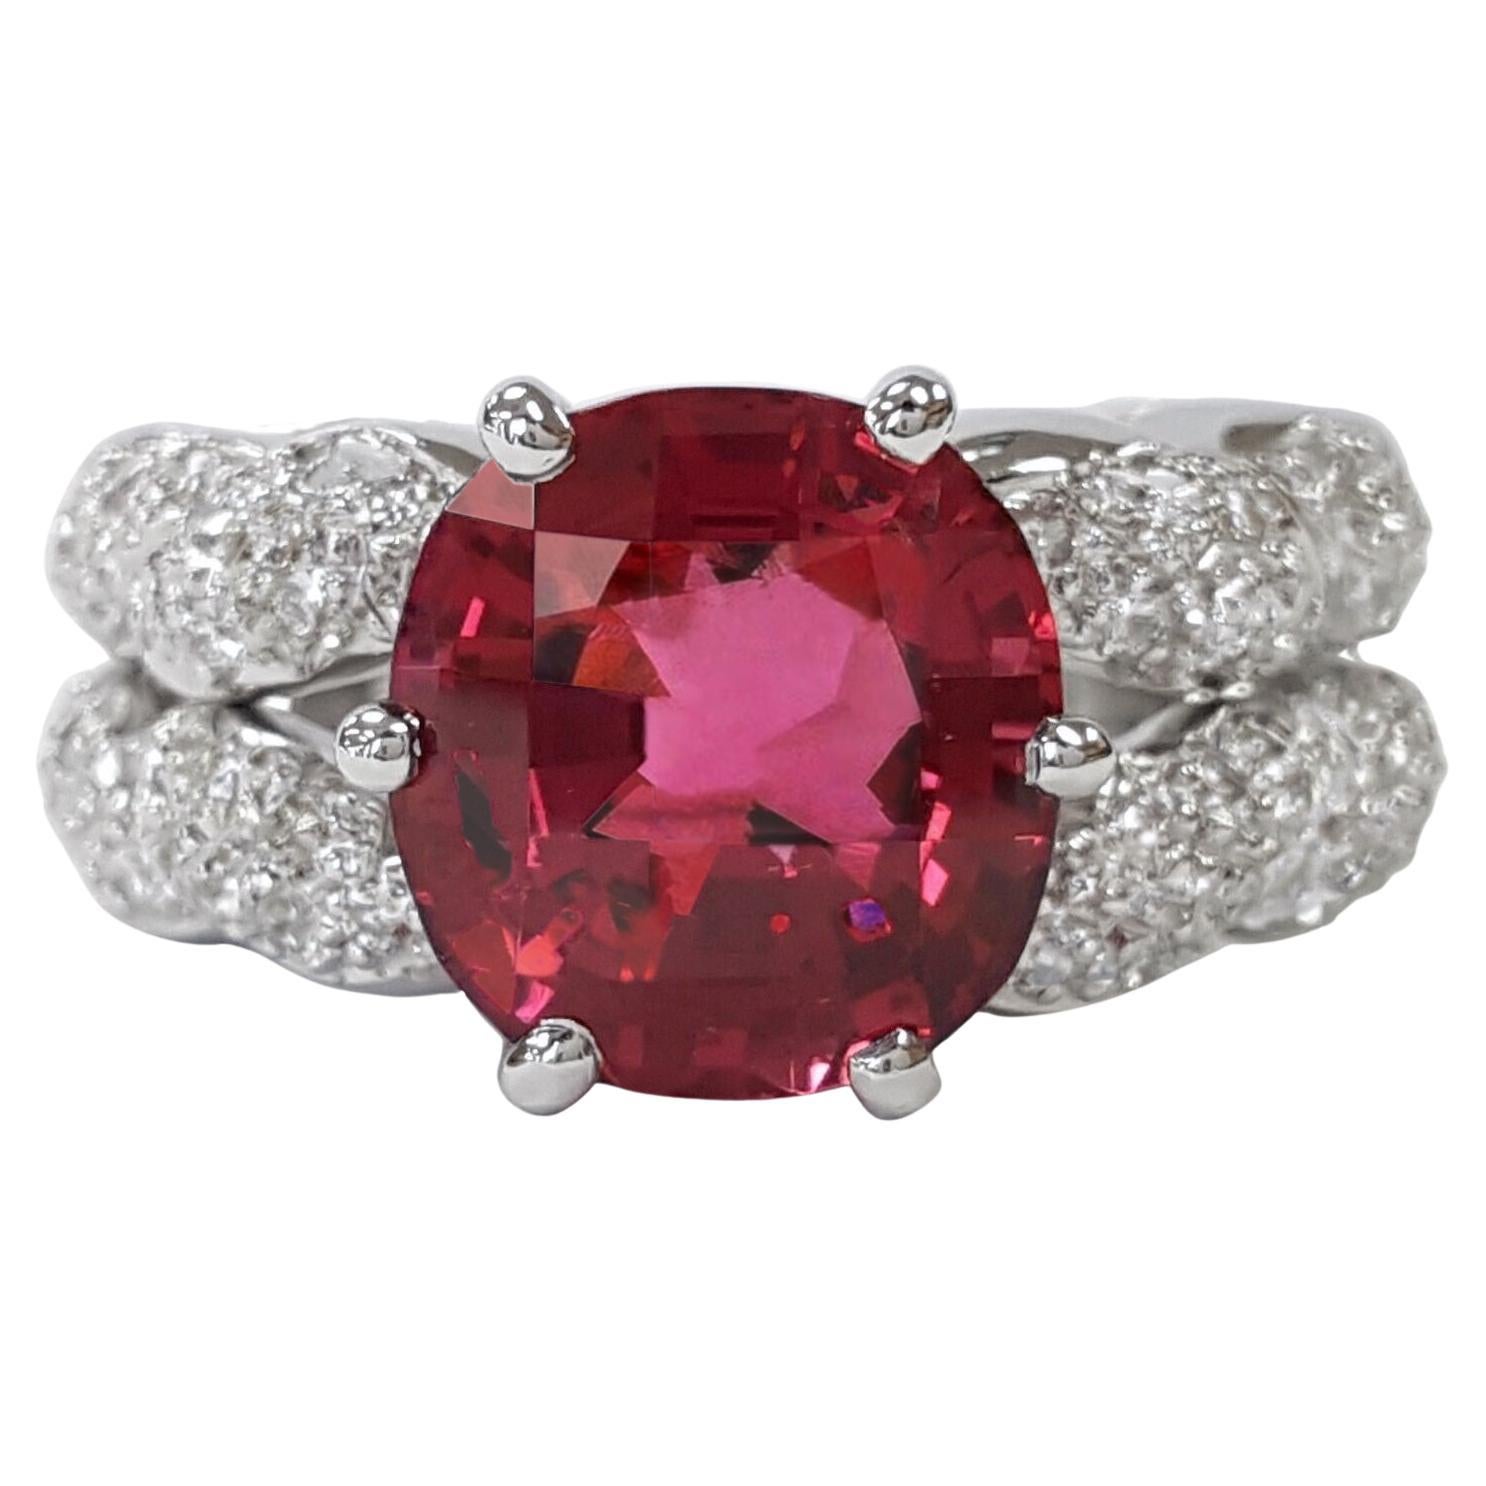 GIA Certified Cushion Red Spinel Diamond Platinum Ring